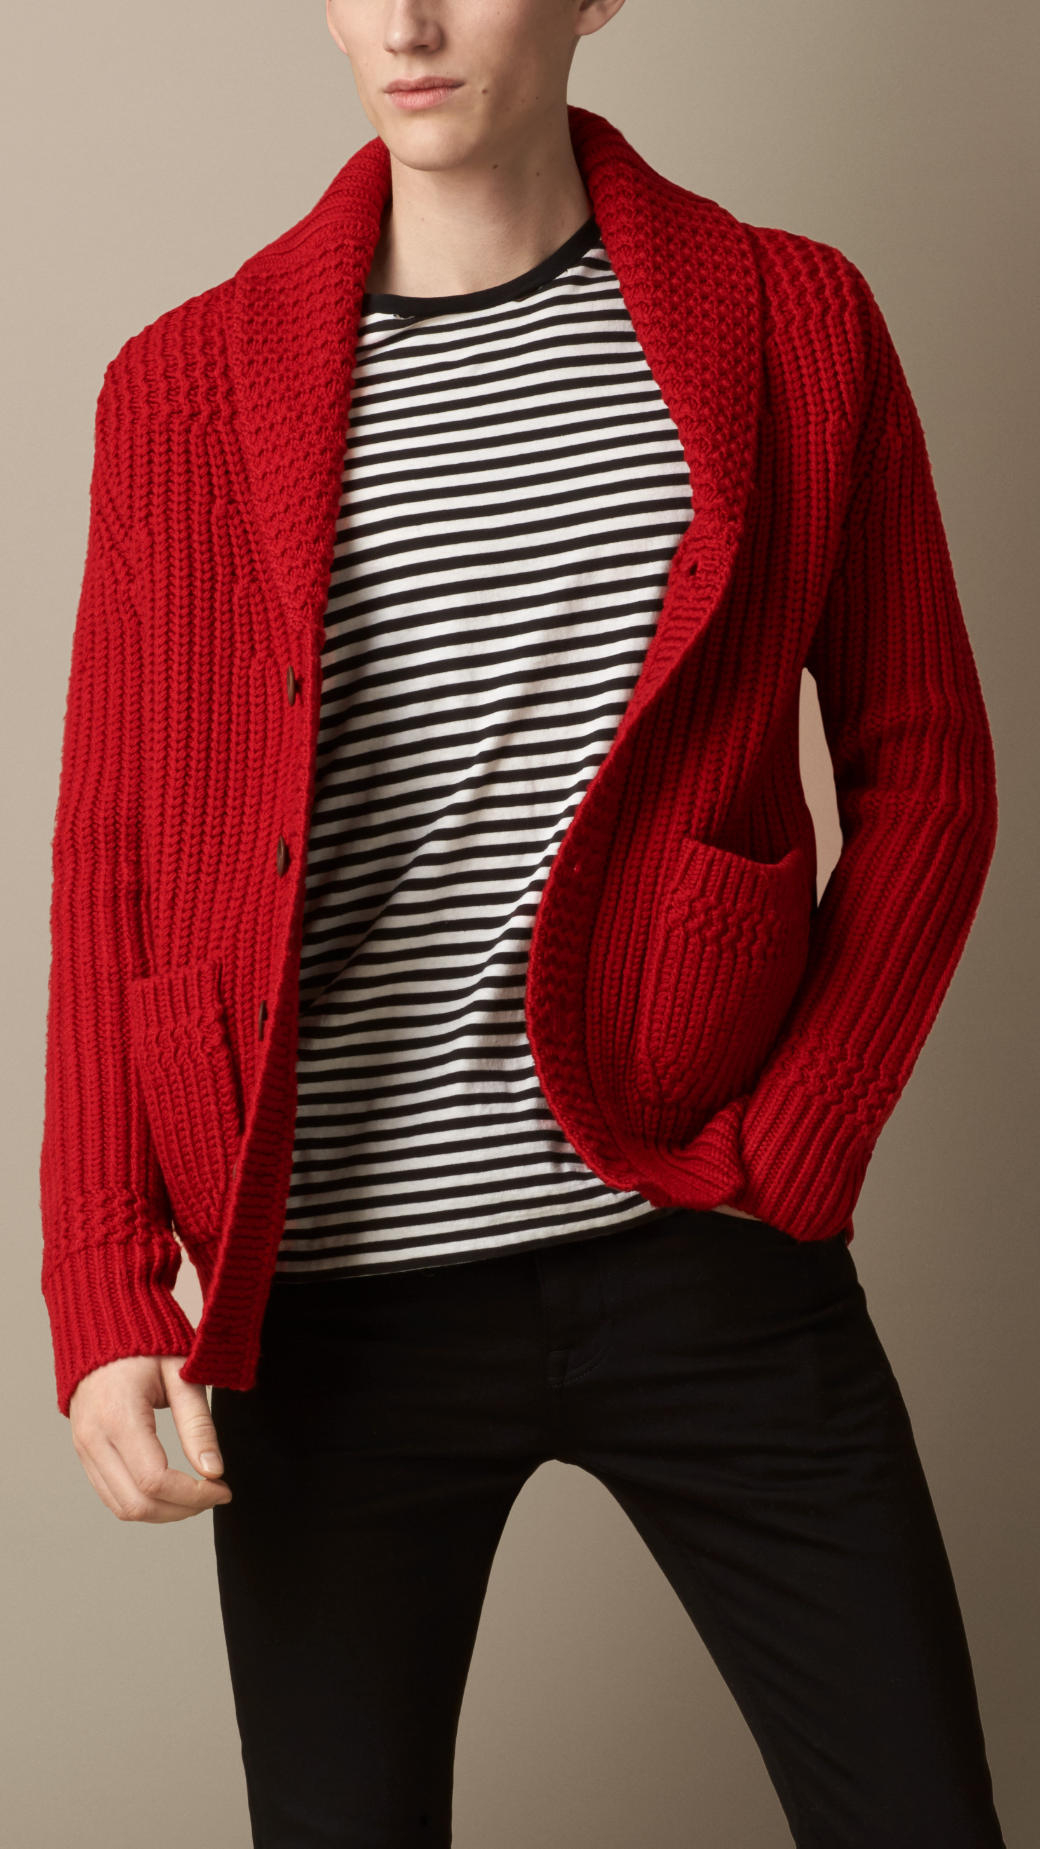 Burberry Shawl Collar Cardigan in Red for Men - Lyst